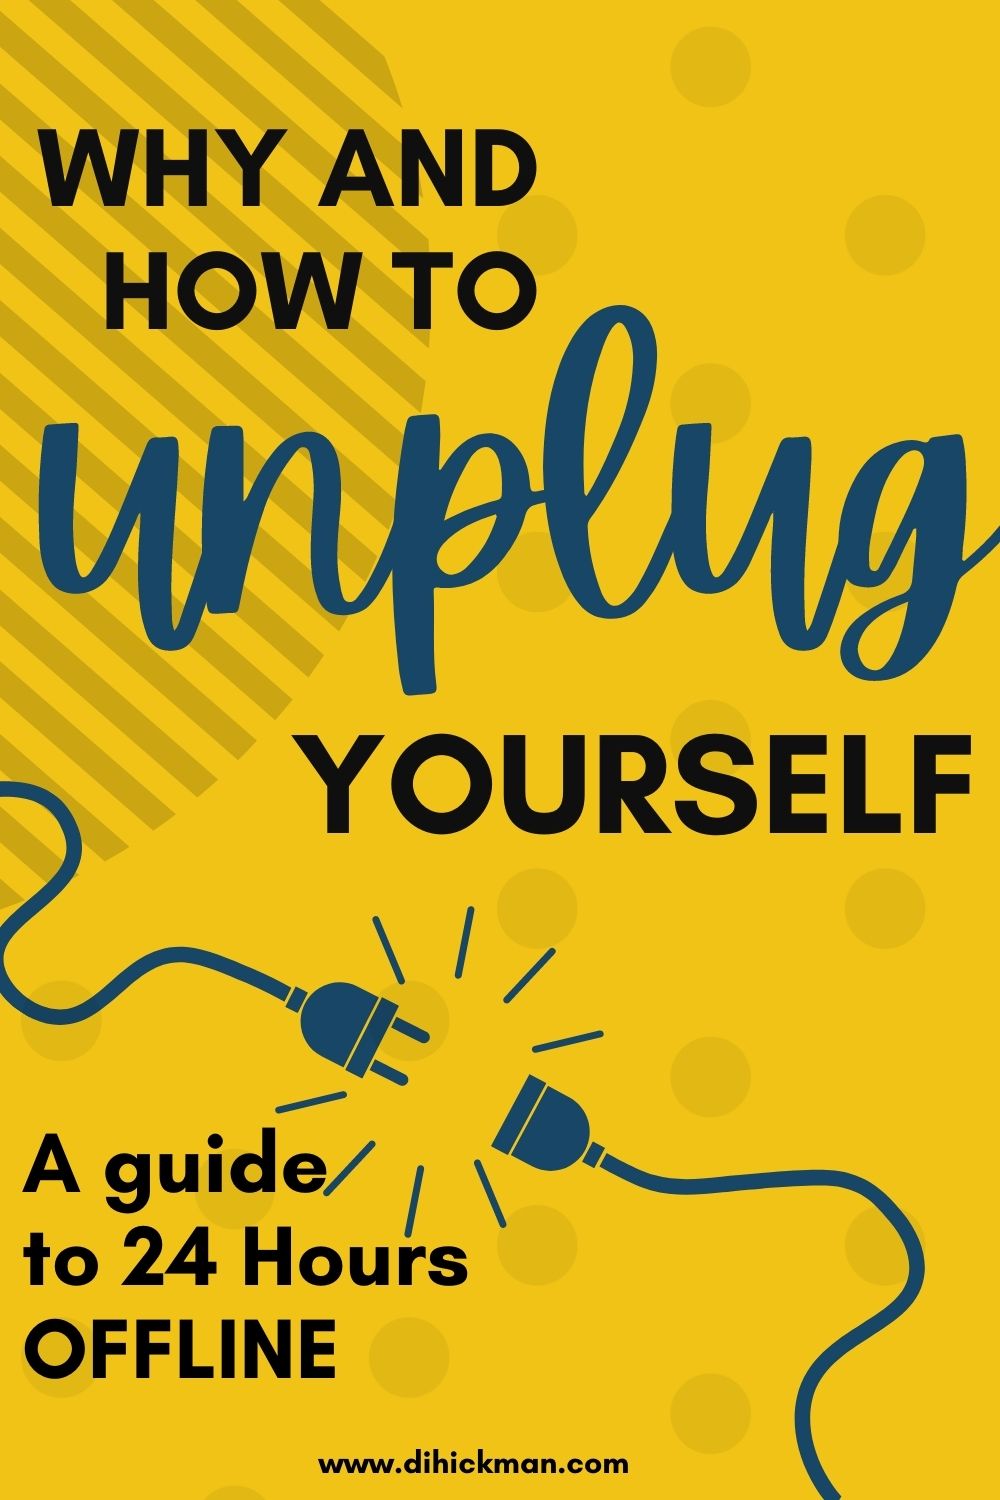 Why and how to unplug yourself, A guide to 24 hours offline